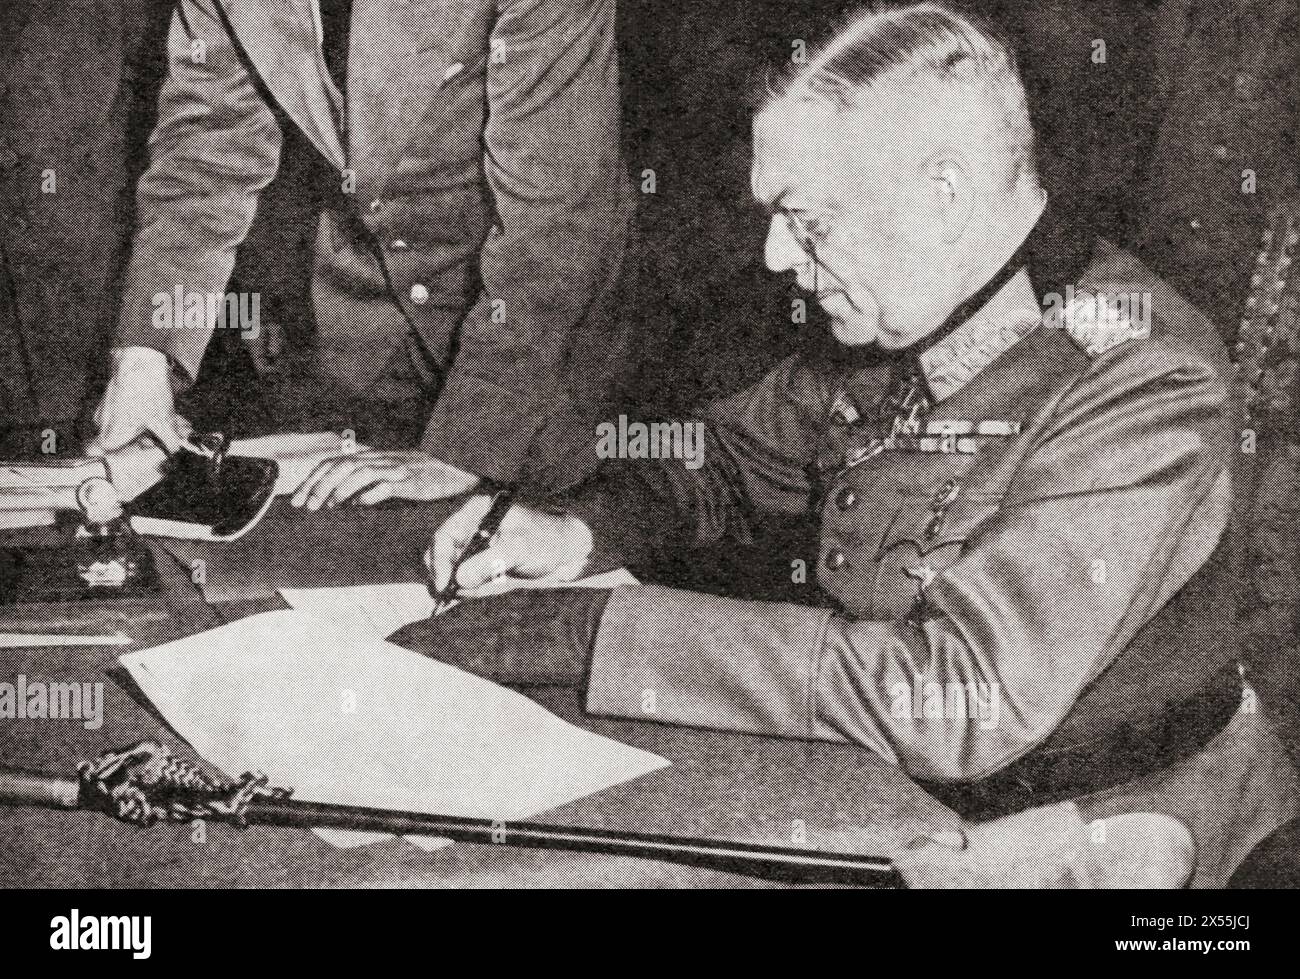 Field-Marshal Wilhelm Keitel signs the ratified terms of unconditional surrender in Berlin, 8 May 1945.  Wilhelm Bodewin Johann Gustav Keitel, 1882 – 1946. German field marshal who held office as chief of the Oberkommando der Wehrmacht (OKW), the high command of Nazi Germany's armed forces, during World War II.  From The War in Pictures, Sixth Year. Stock Photo